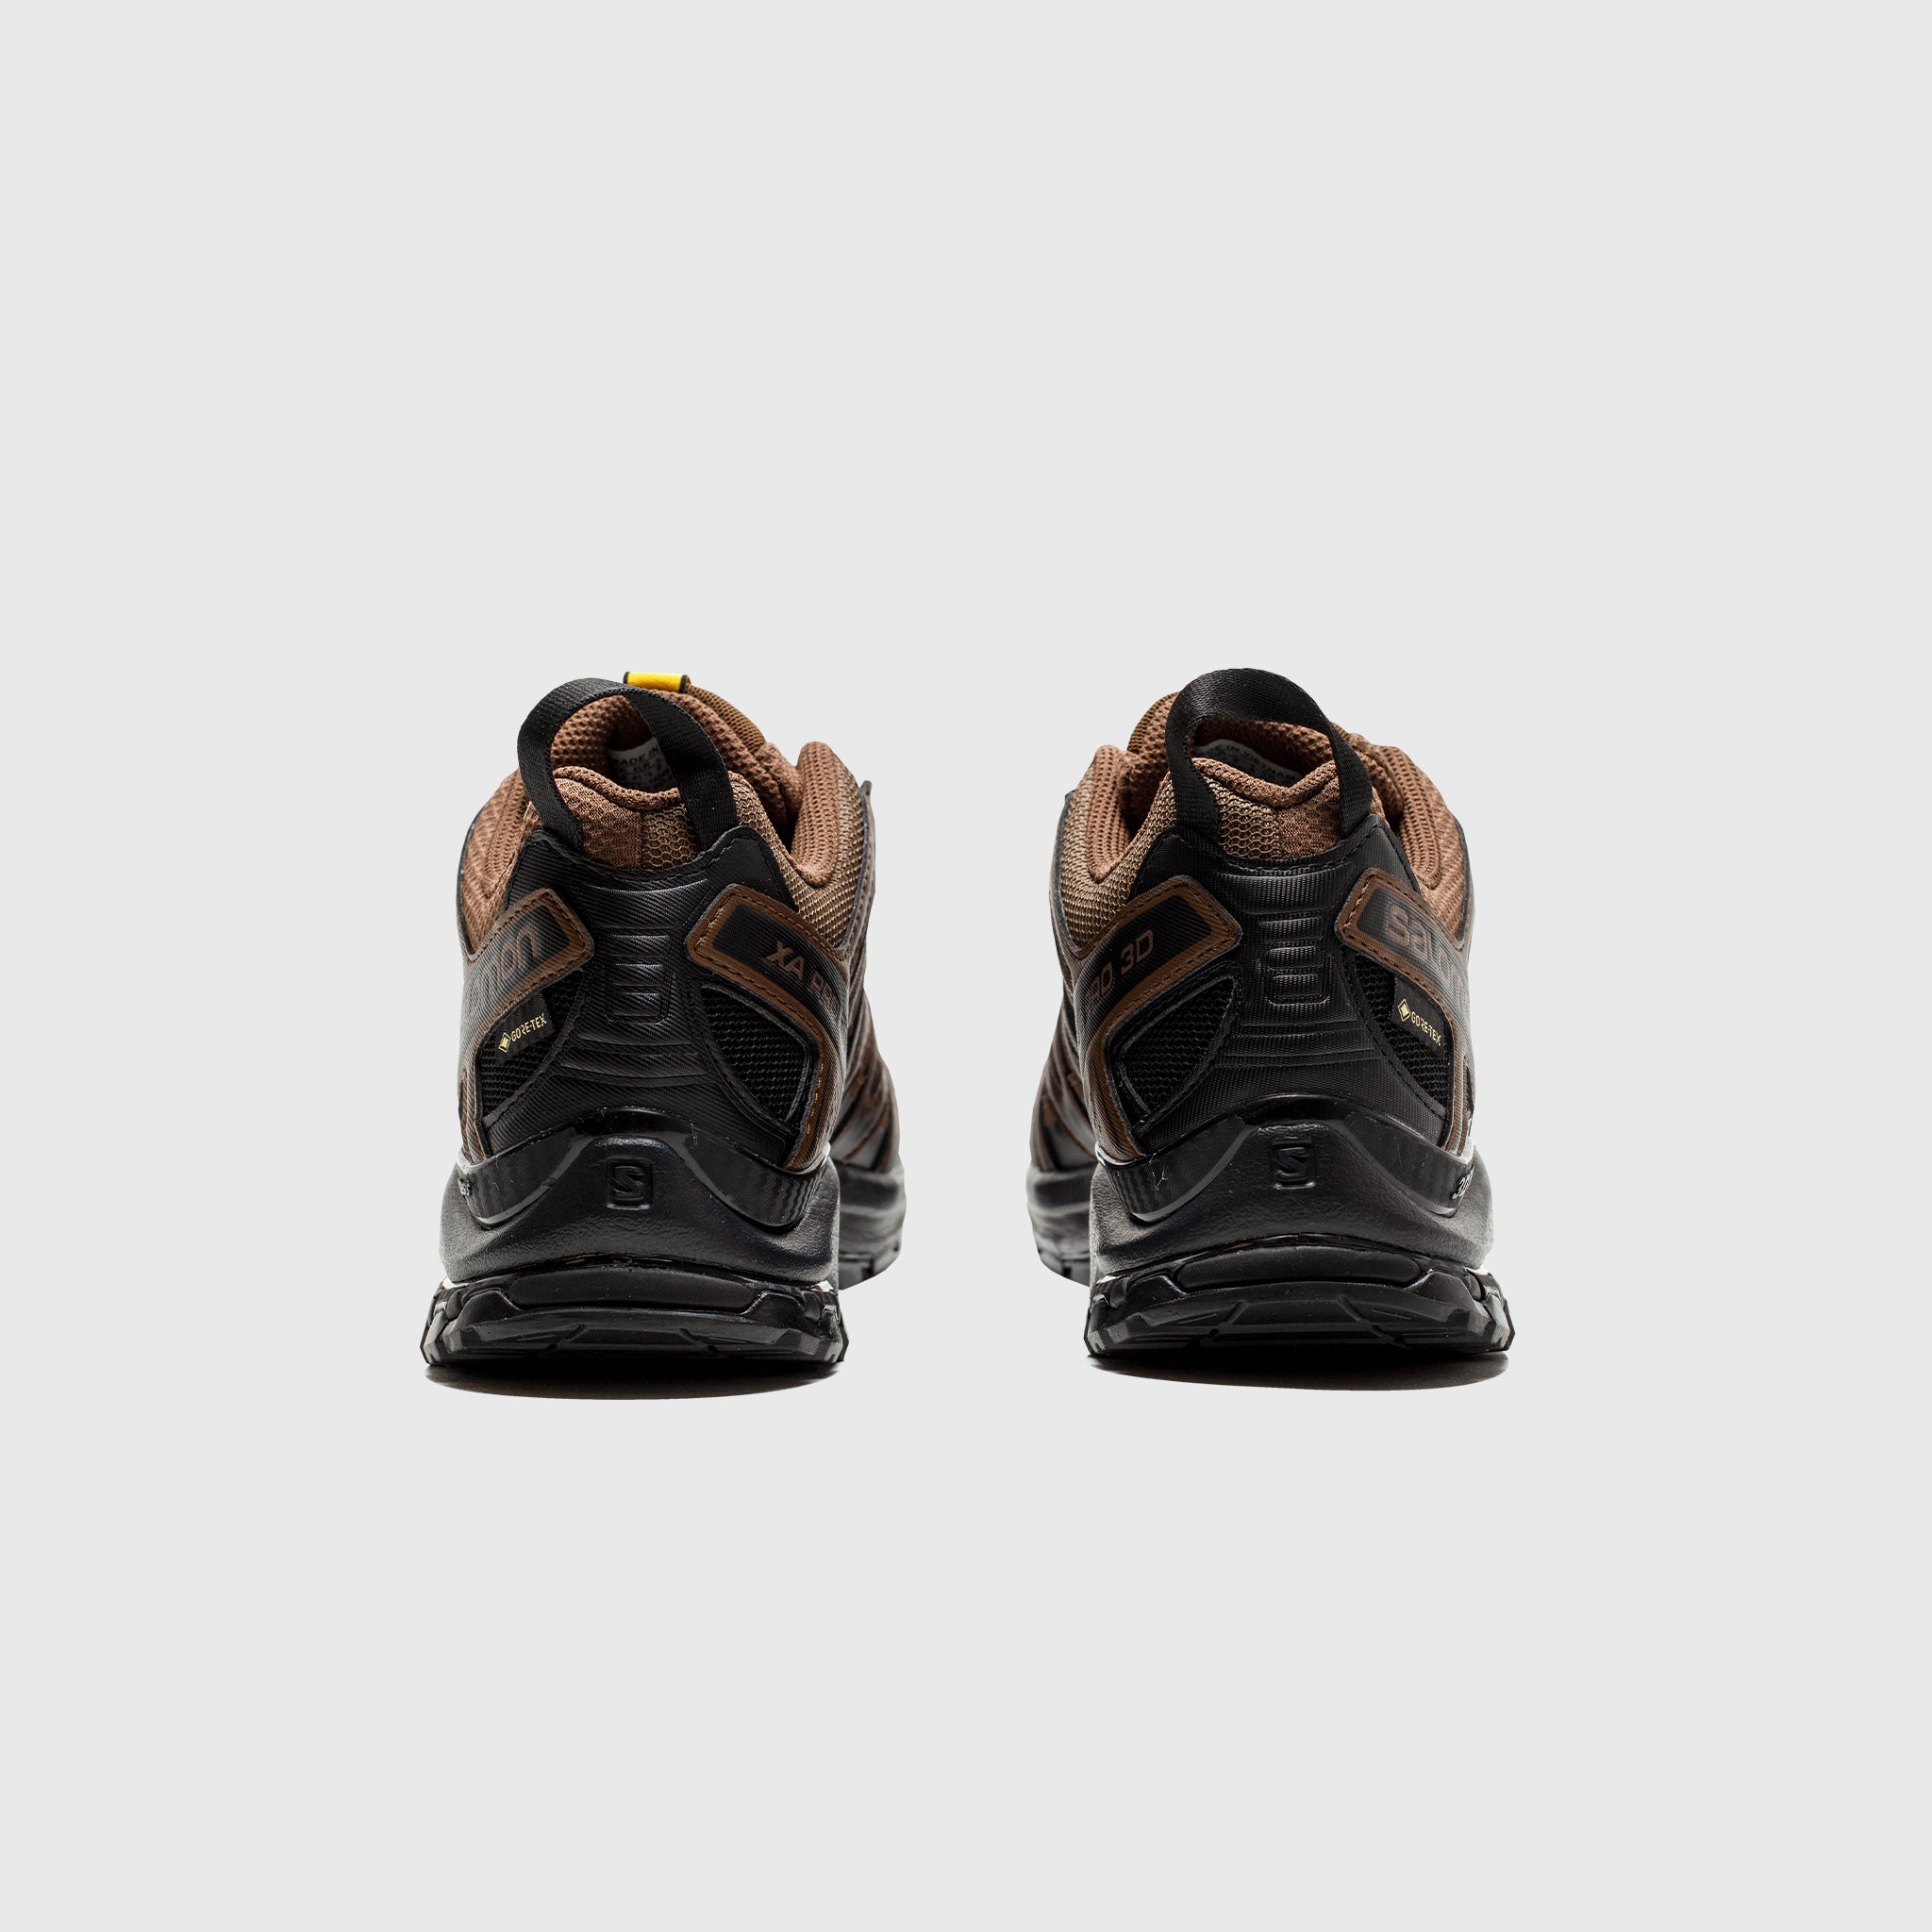 XA PRO 3D GORE-TEX FOR AND WANDER – PACKER SHOES